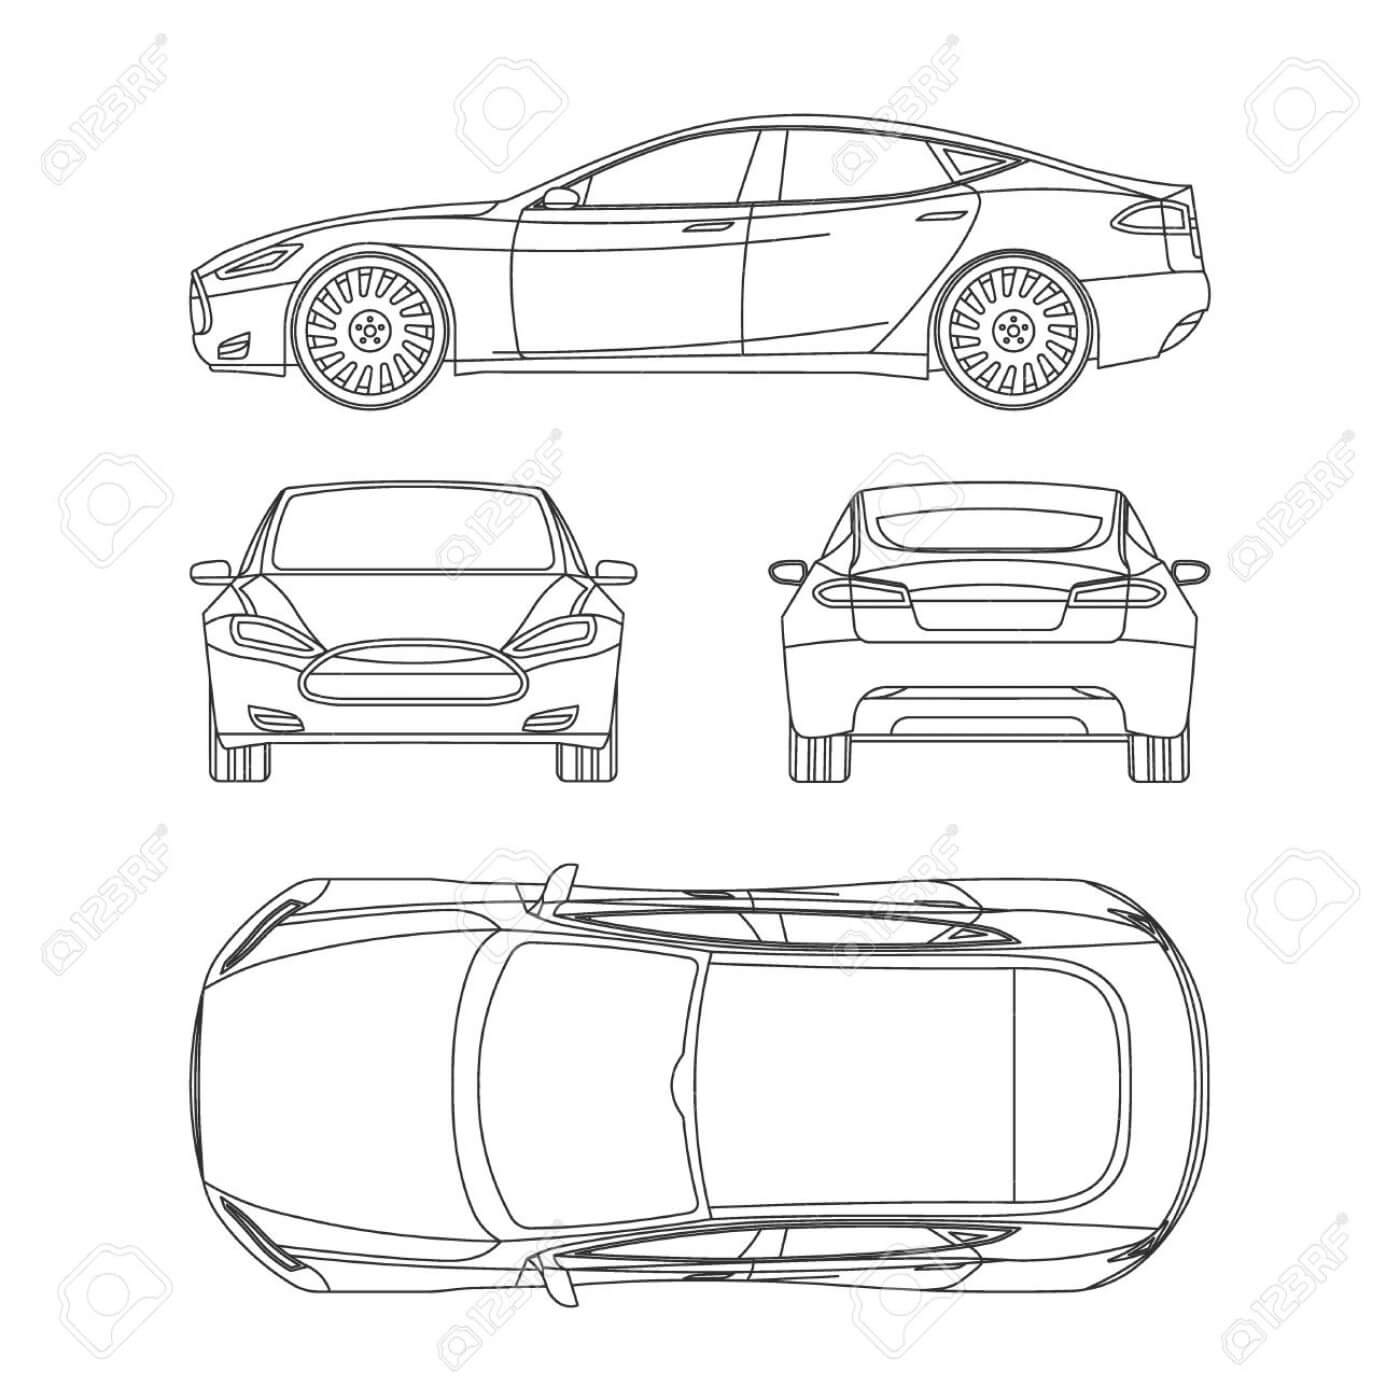 012 Template Ideas Vehicle Condition Report Car Line Draw With Car Damage Report Template